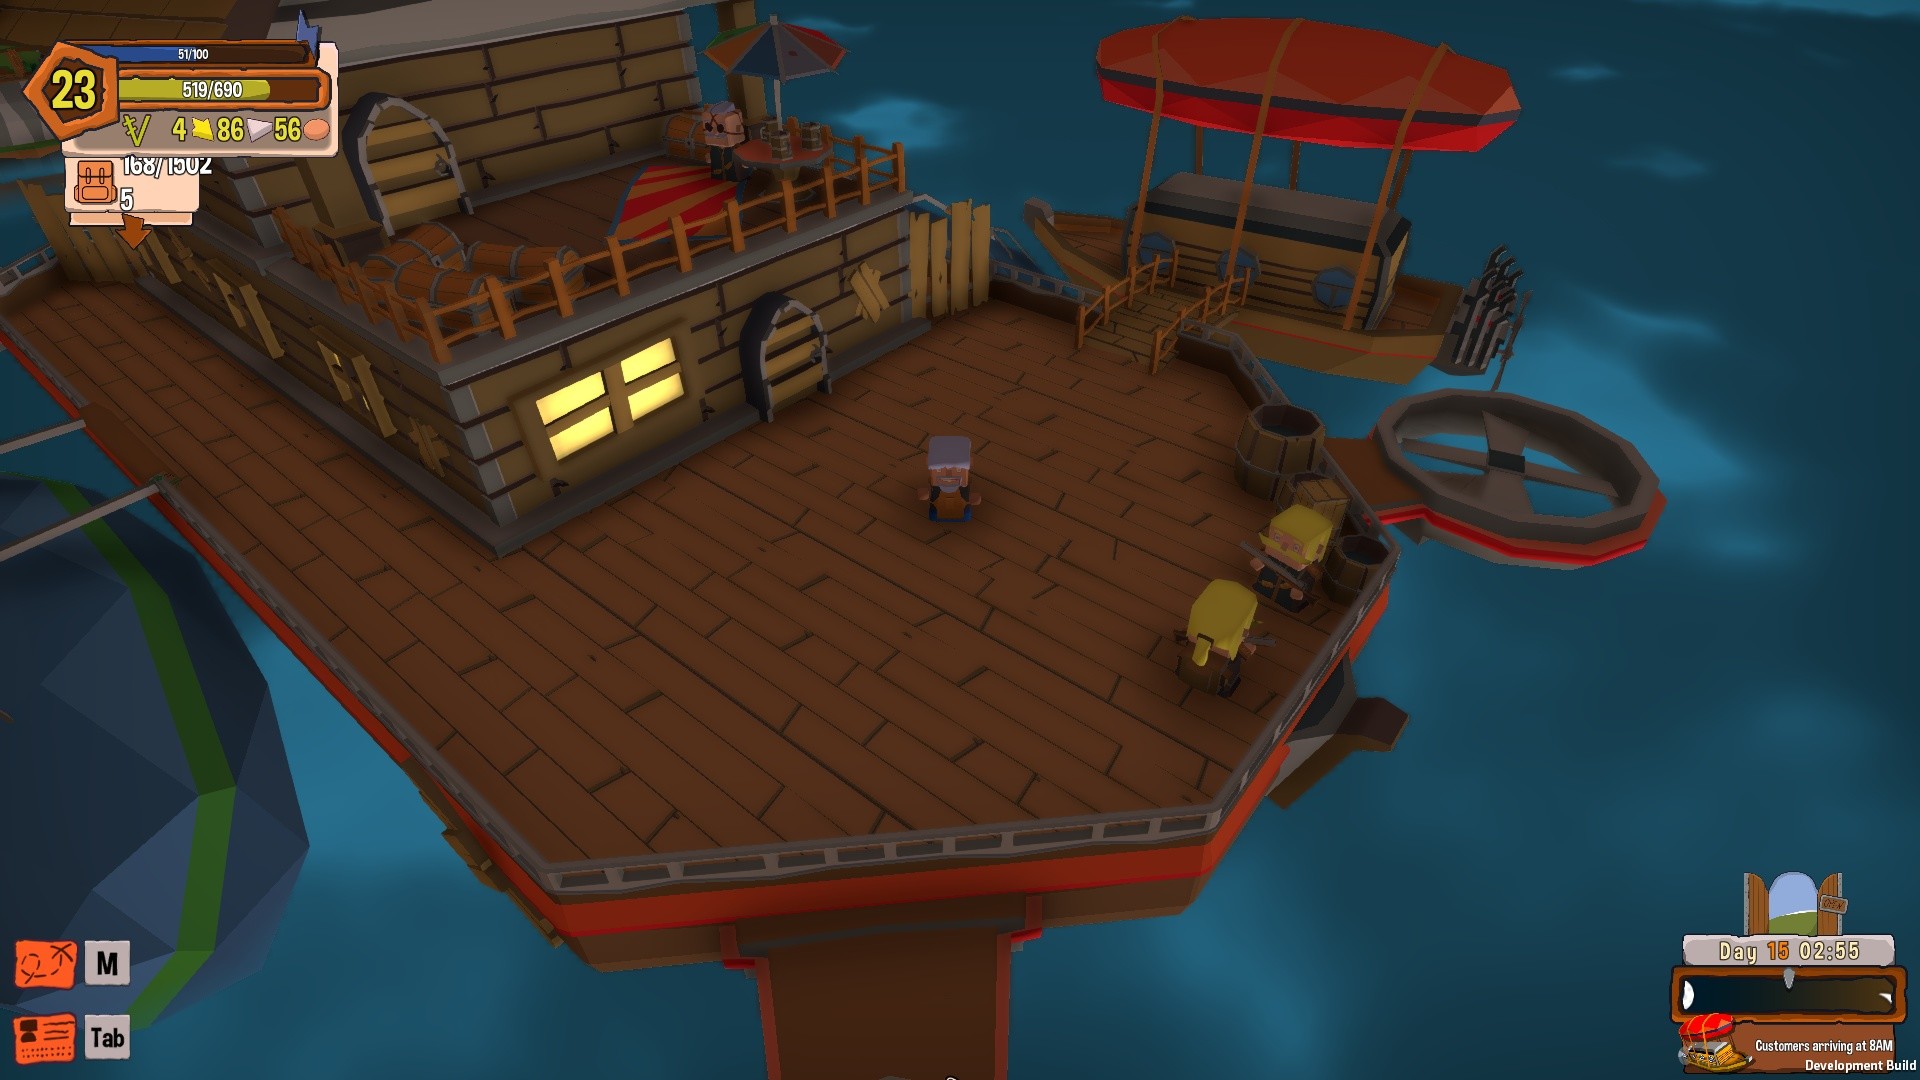 Craftlands Workshoppe - Third Person Resource Management and Trading RPG screenshot